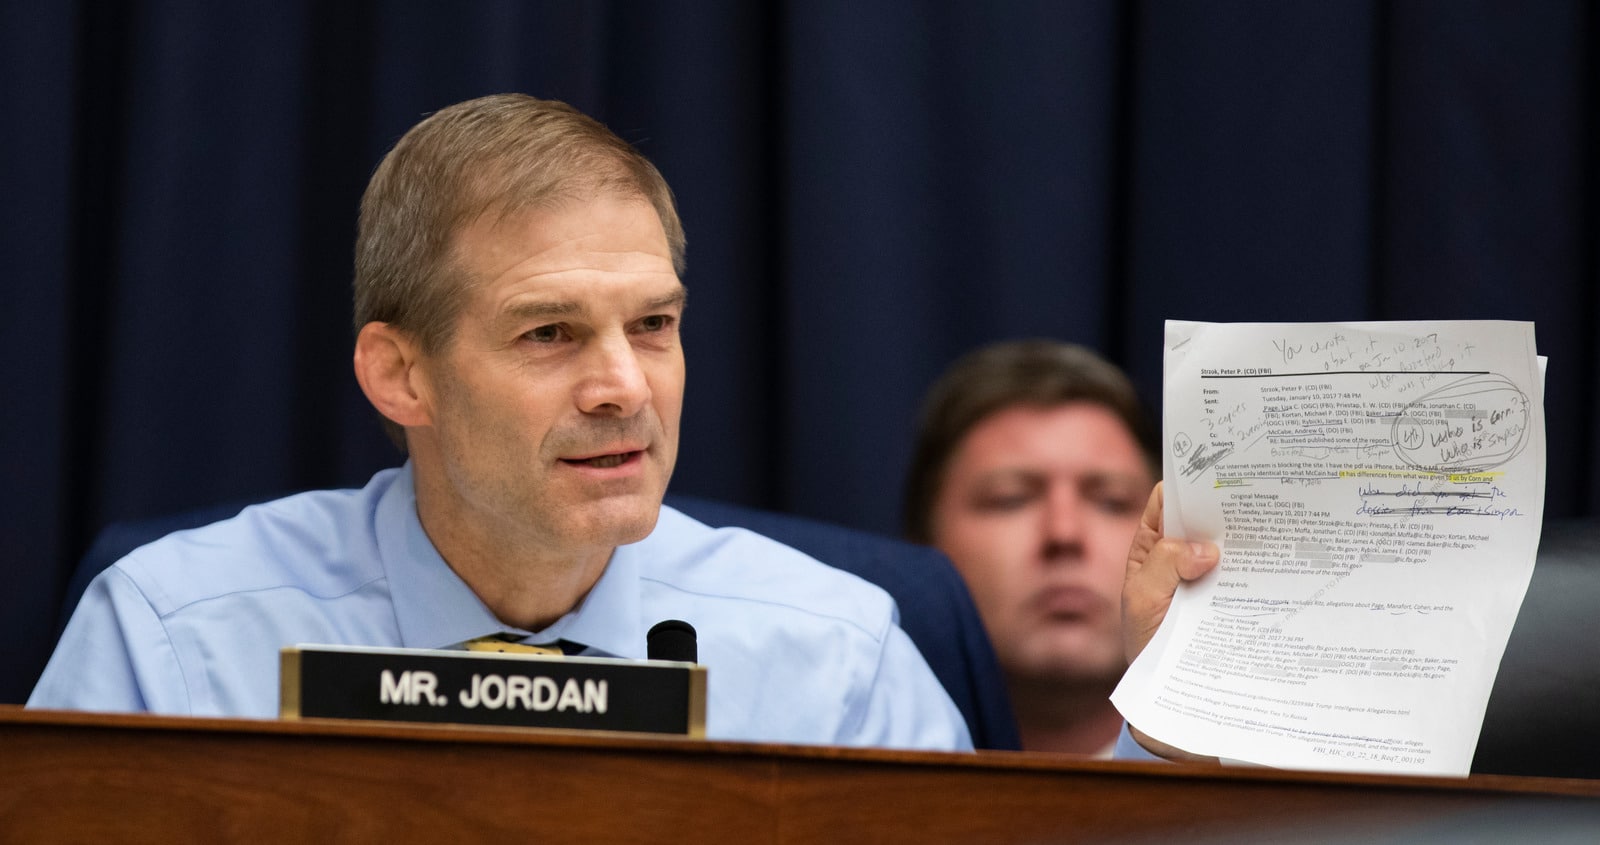 'This Says It All': GOP Rep. Jordan Makes a Big Discovery In His Investigation, Investigators Are Looking Into Hunter Biden Still As Special Counsel Indicted Him: Report